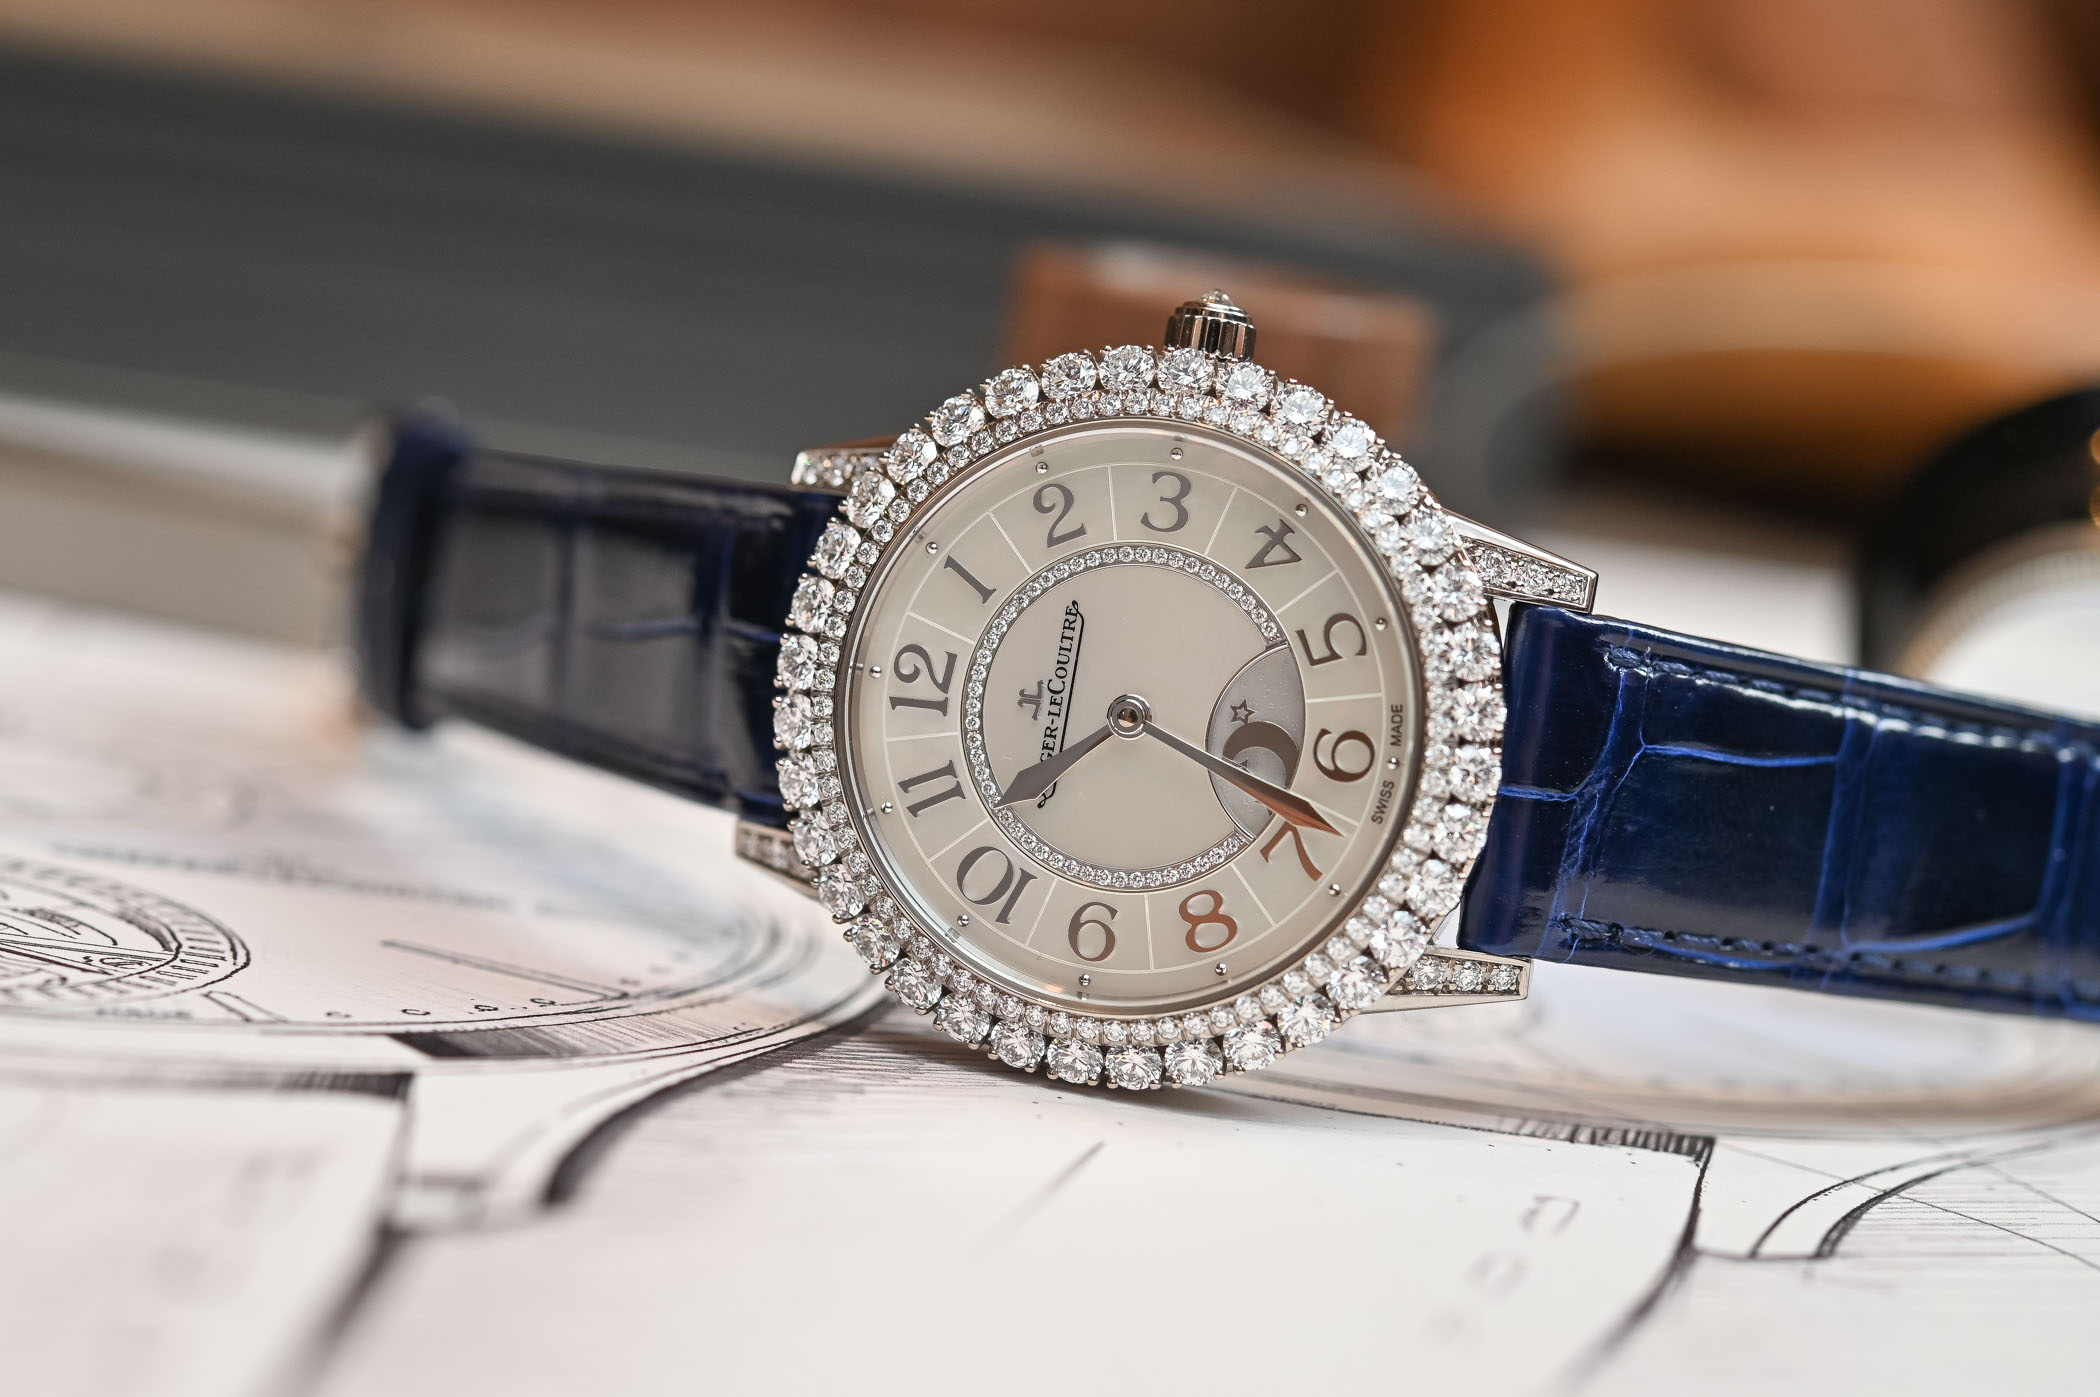 Jaeger-LeCoultre-Rendez-Vous-Night-and-Day-Jewellery-Watch-1.jpg